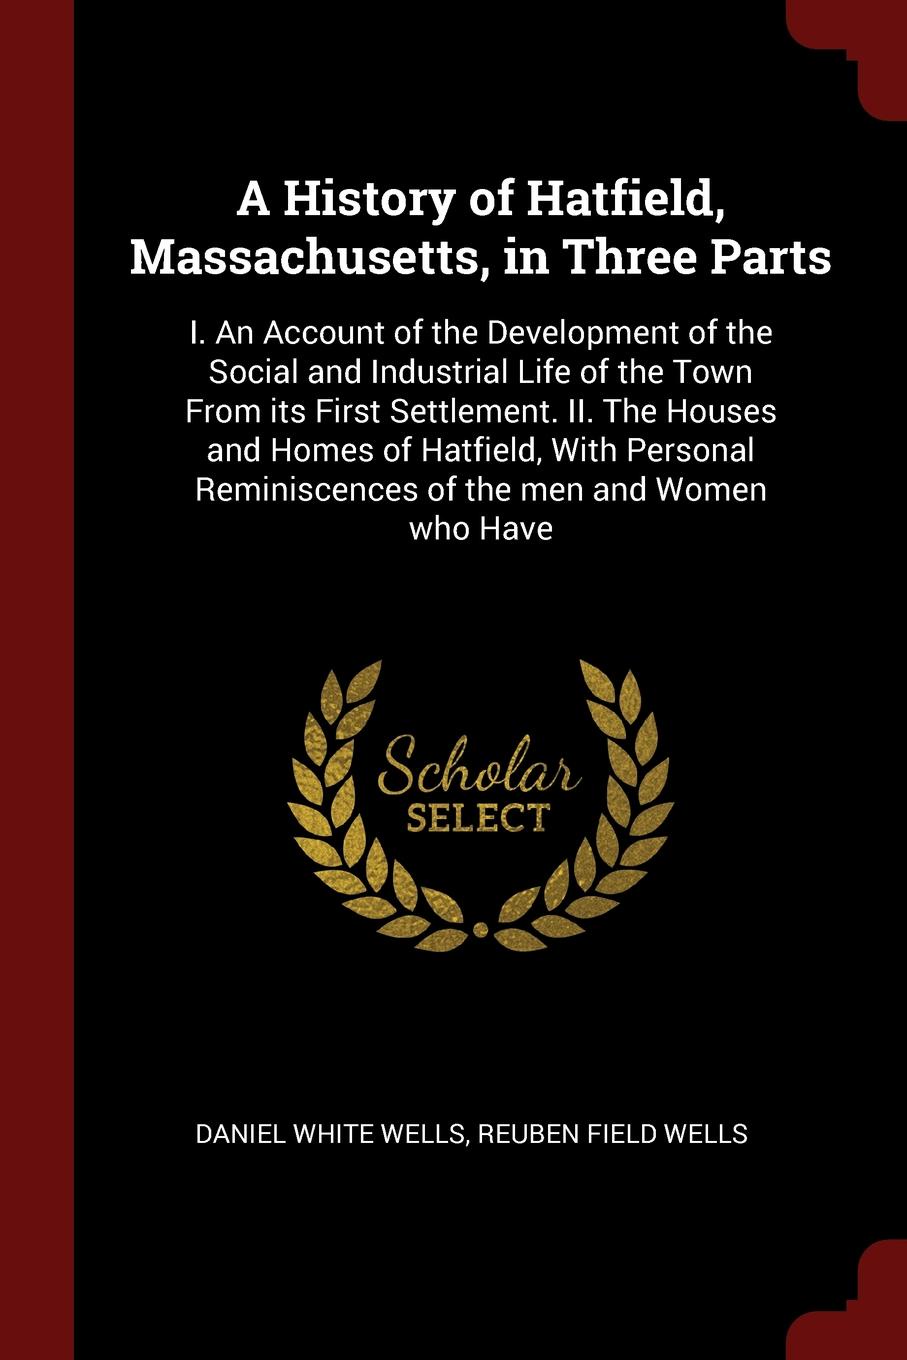 A History of Hatfield, Massachusetts, in Three Parts. I. An Account of the Development of the Social and Industrial Life of the Town From its First Settlement. II. The Houses and Homes of Hatfield, With Personal Reminiscences of the men and Women ...